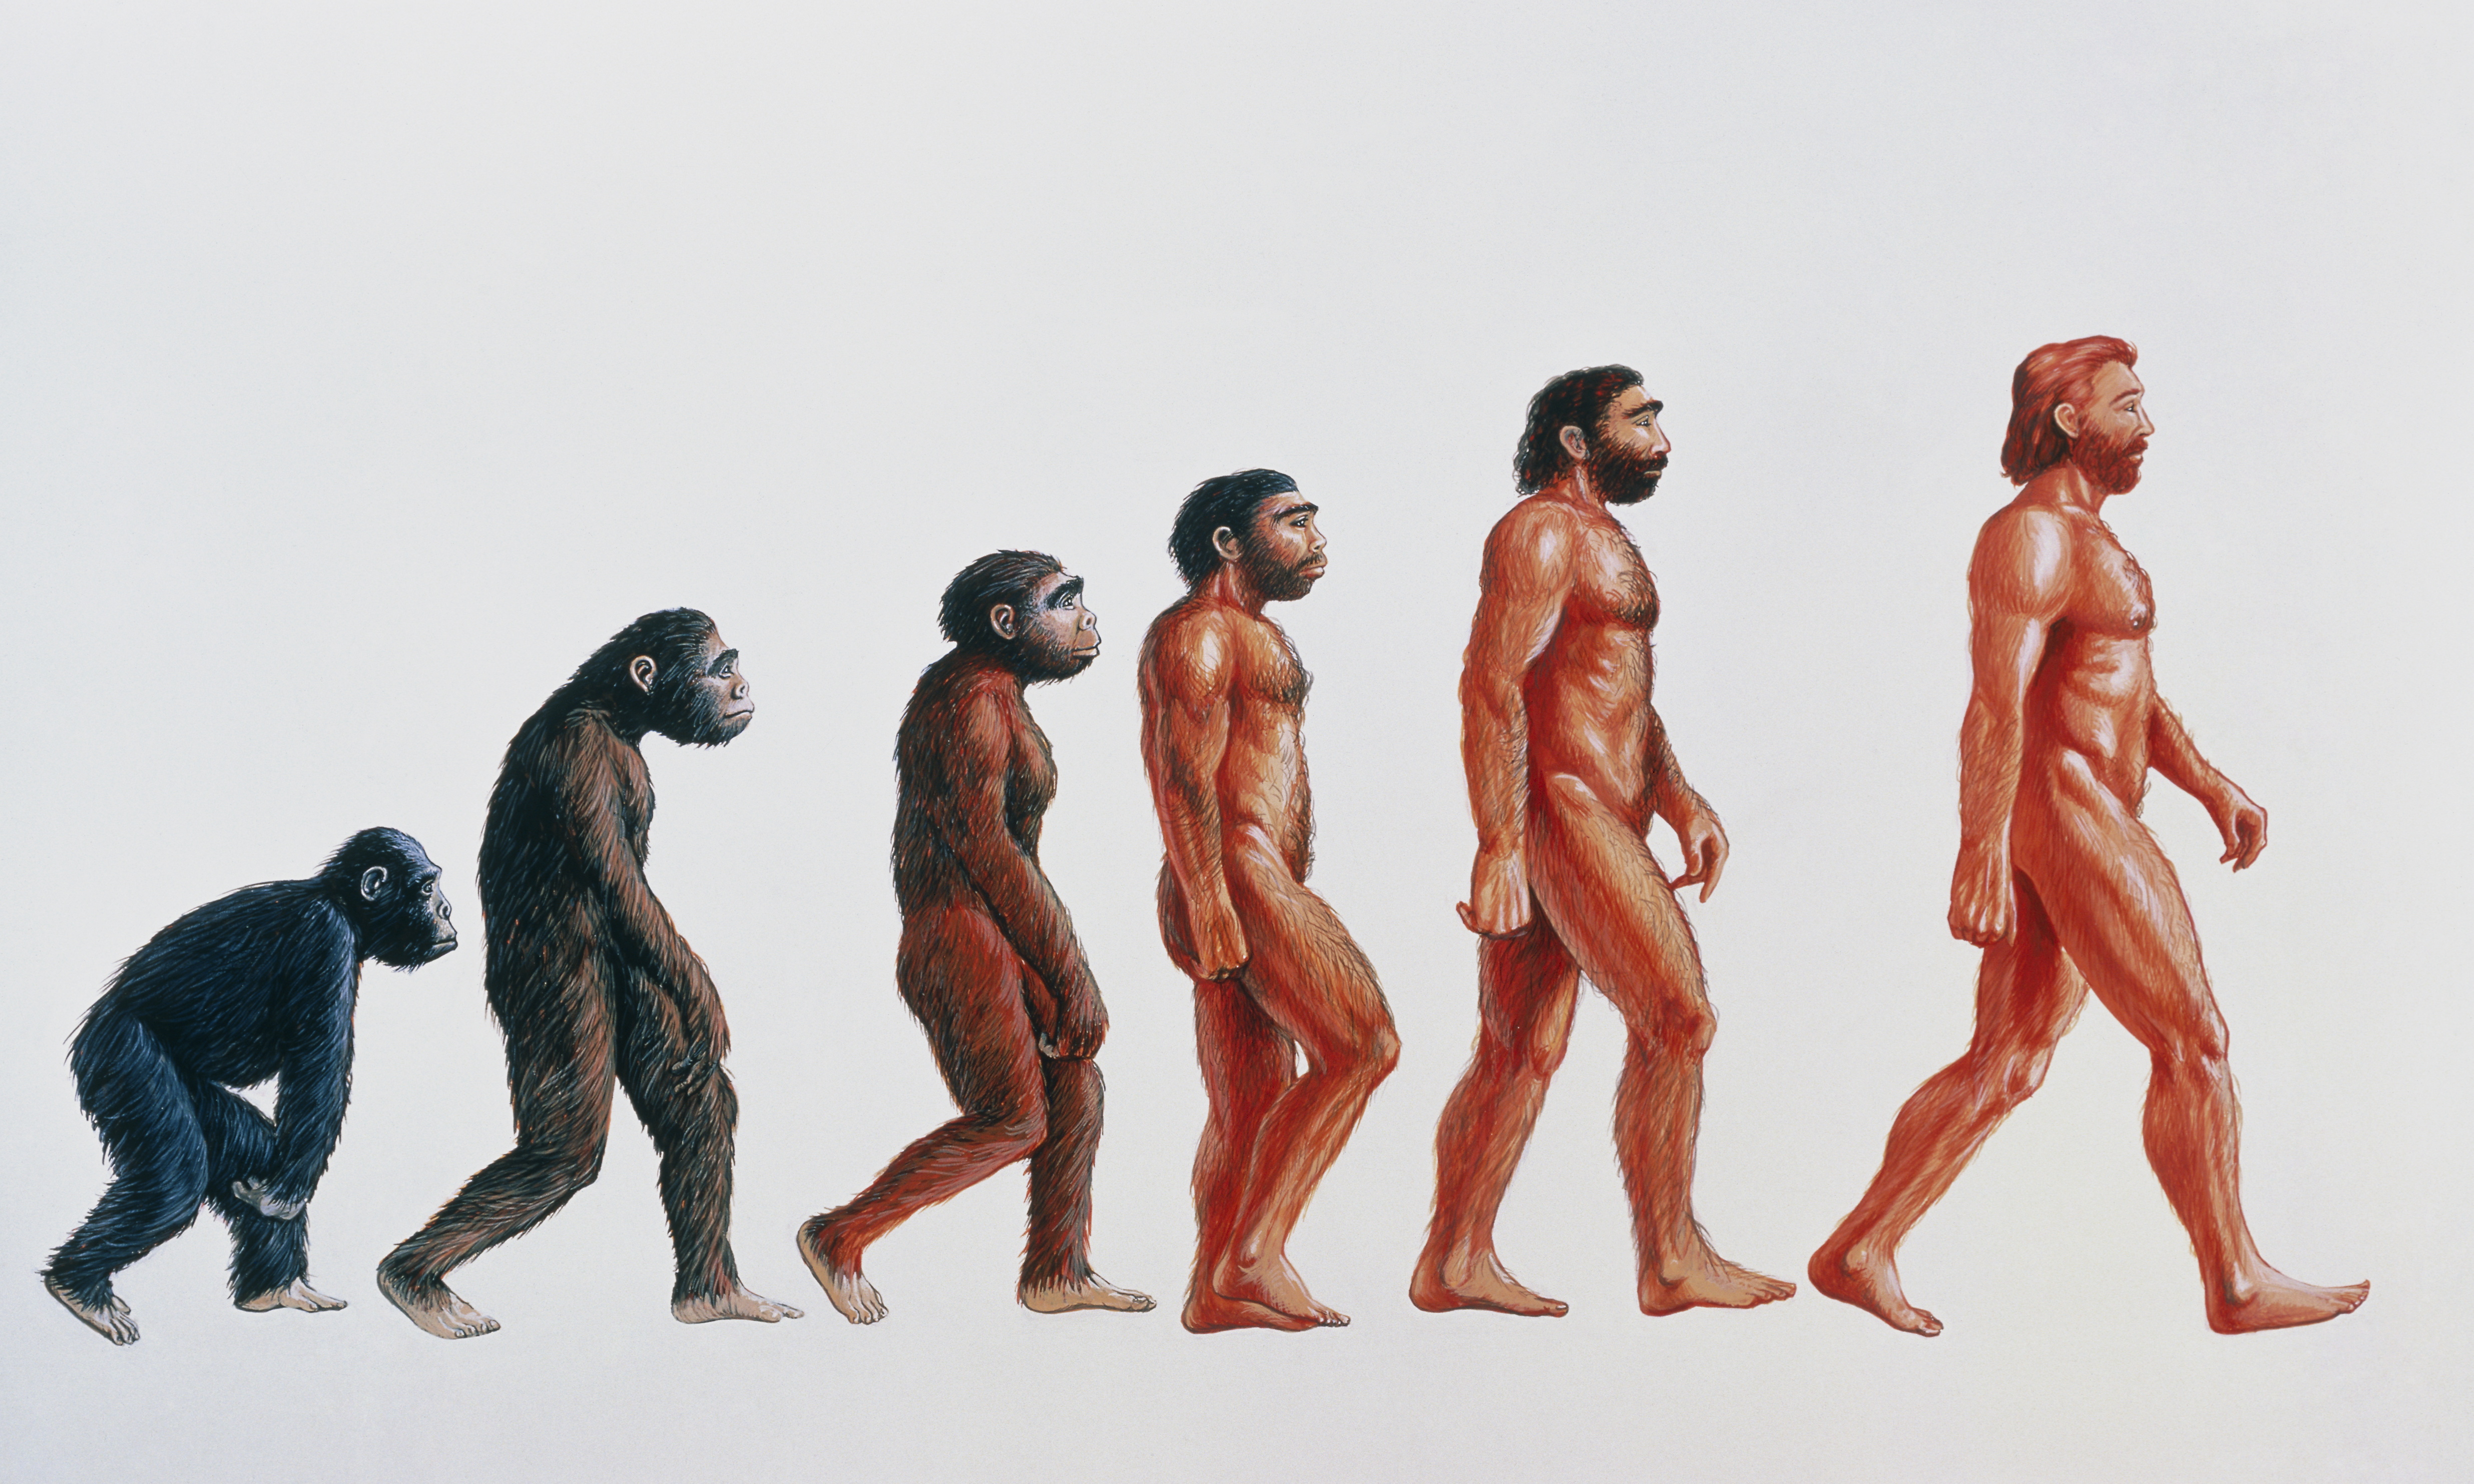 The theory of evolution by natural selection